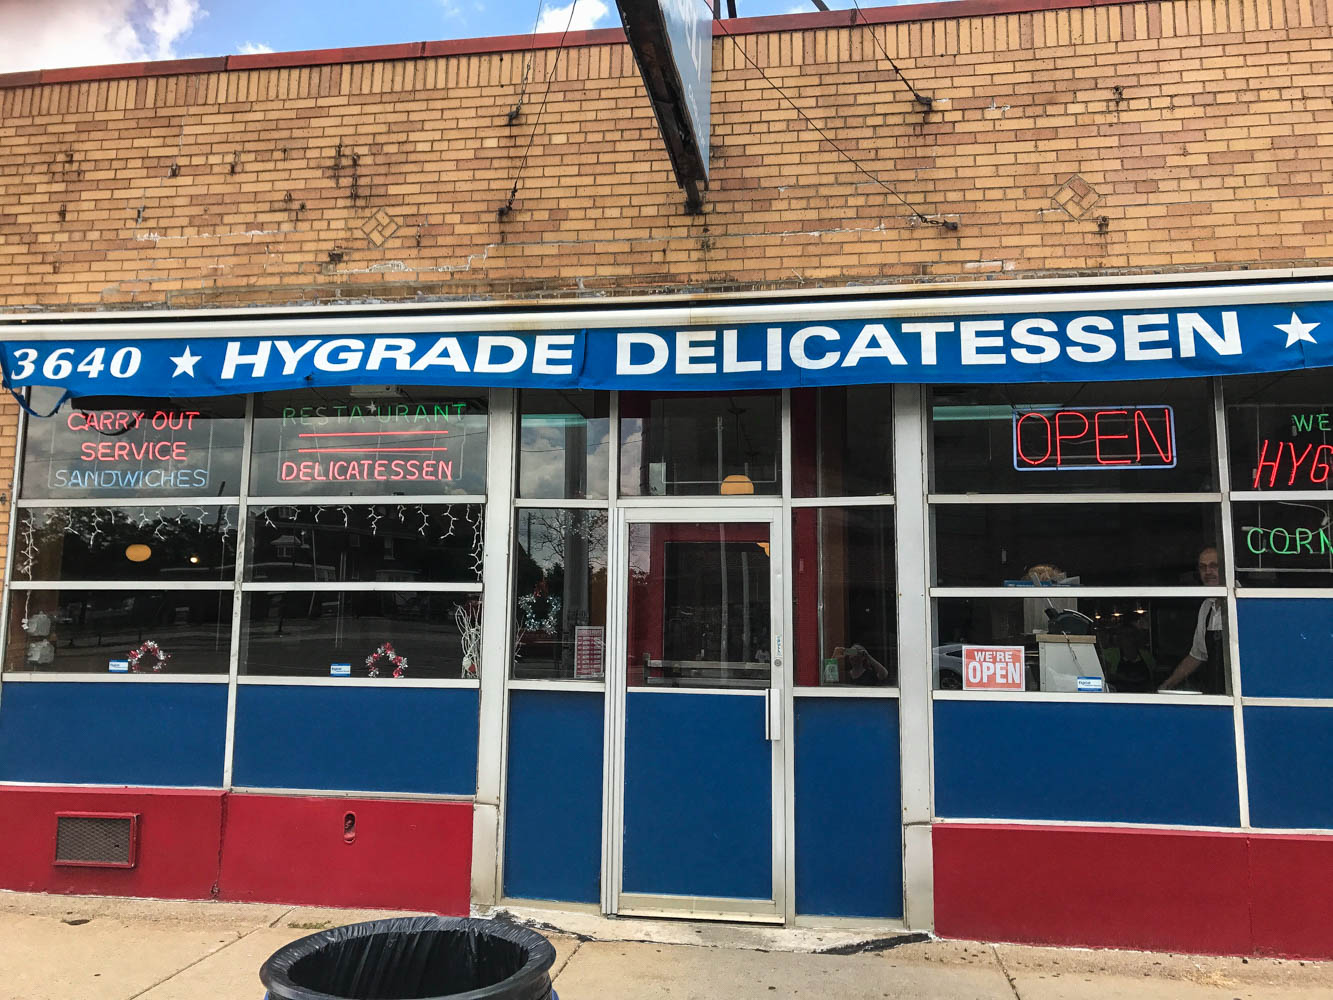 Hygrade Deli in Detroit, MI is the spot for their famous Corned Beef Sandwich. Find the full post at www.thebite2night.com